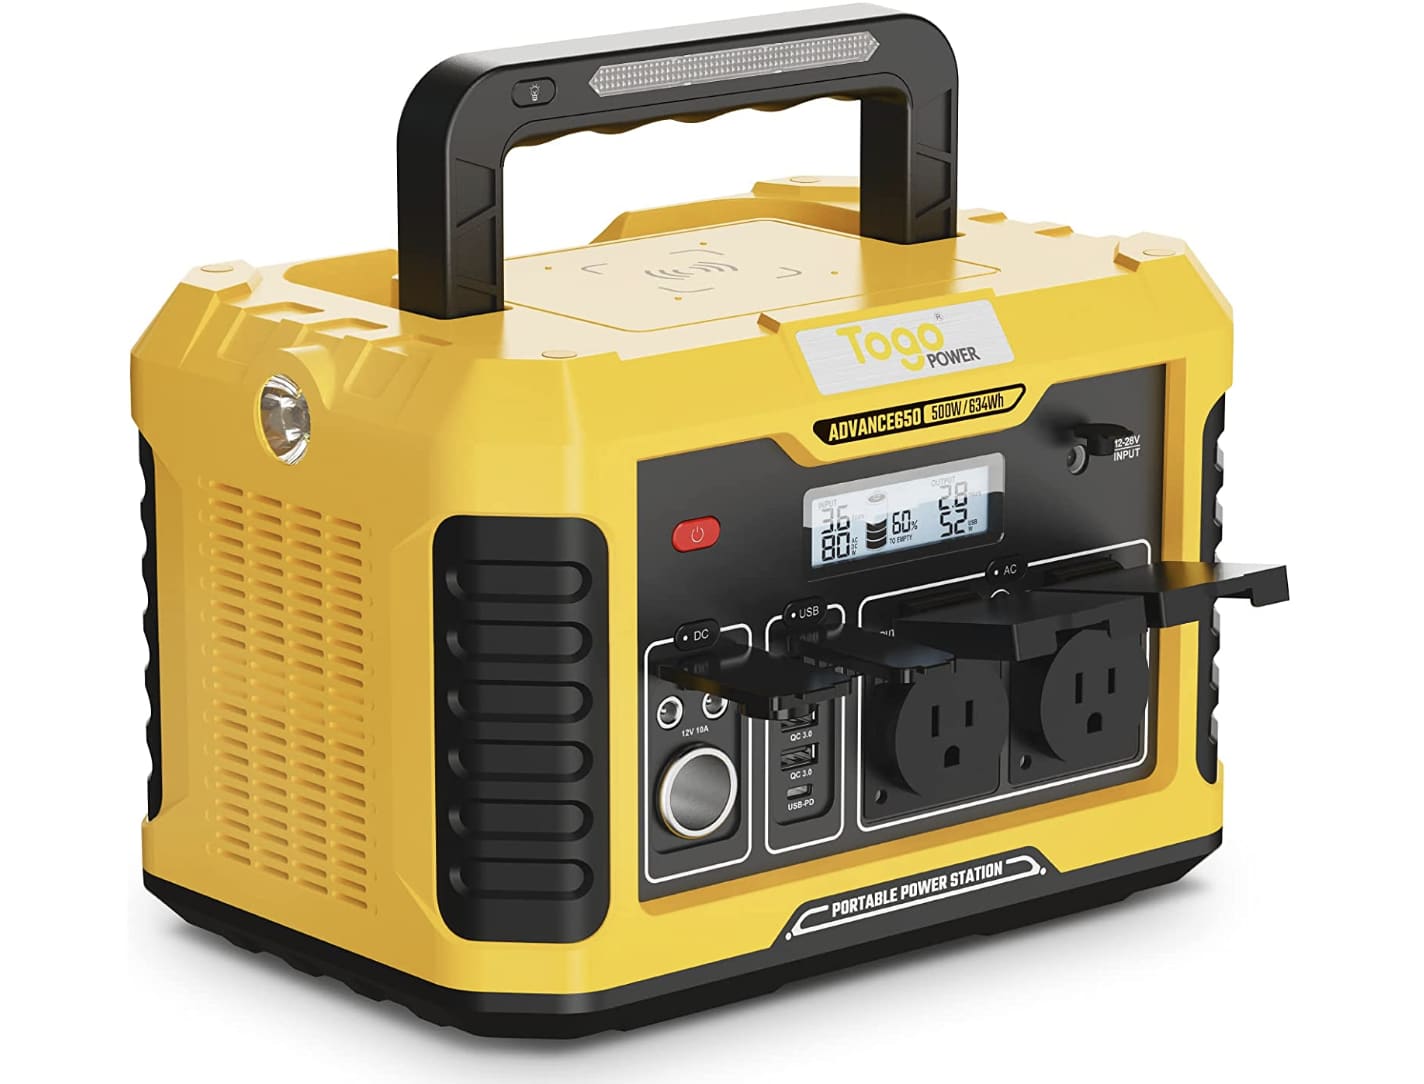 Togo POWER A650 Portable Power Station